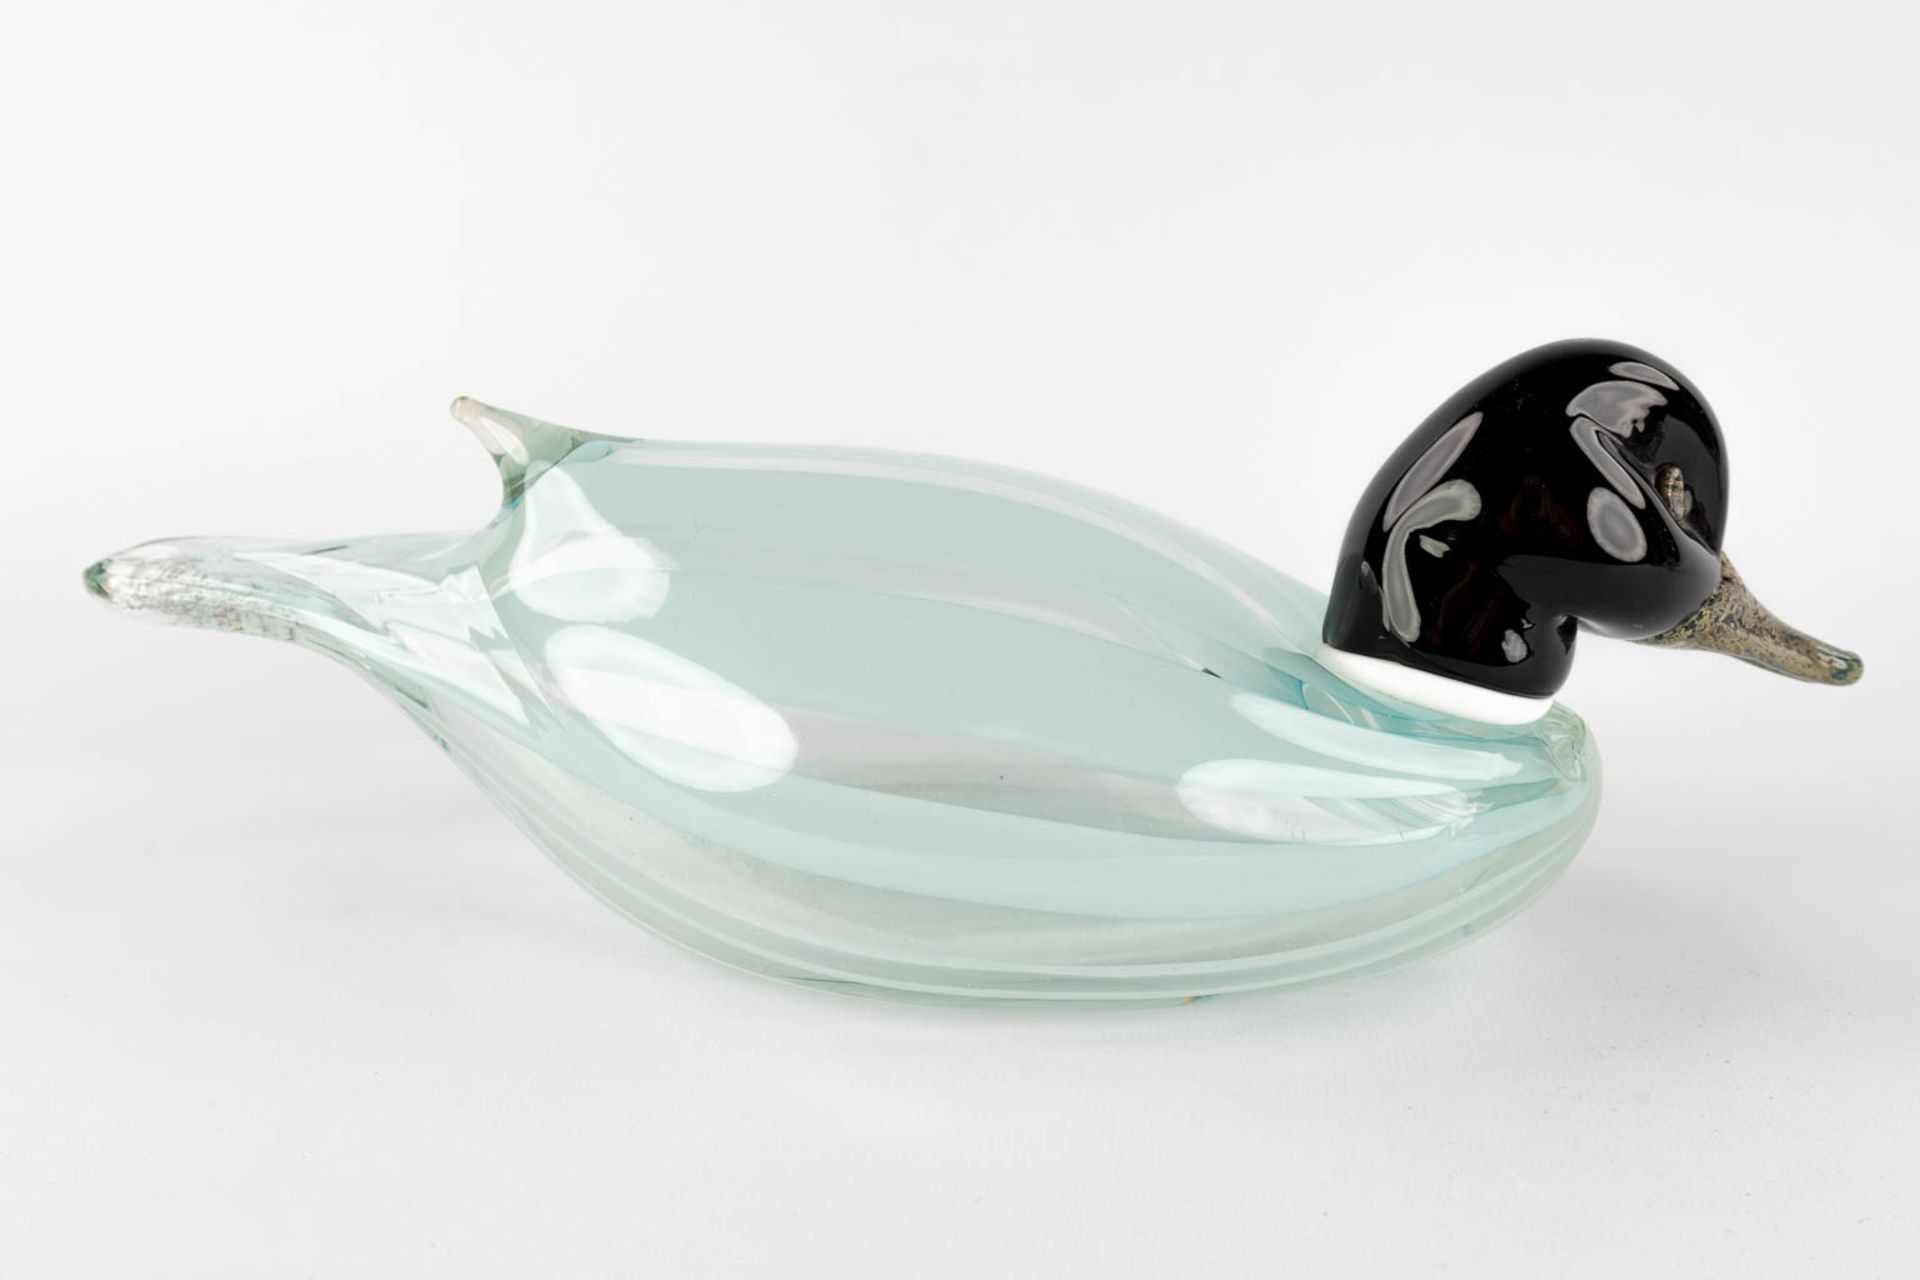 Two ducks, glass, Murano, Italy. Cenedese. (D:12 x W:30 x H:10 cm) - Image 3 of 17